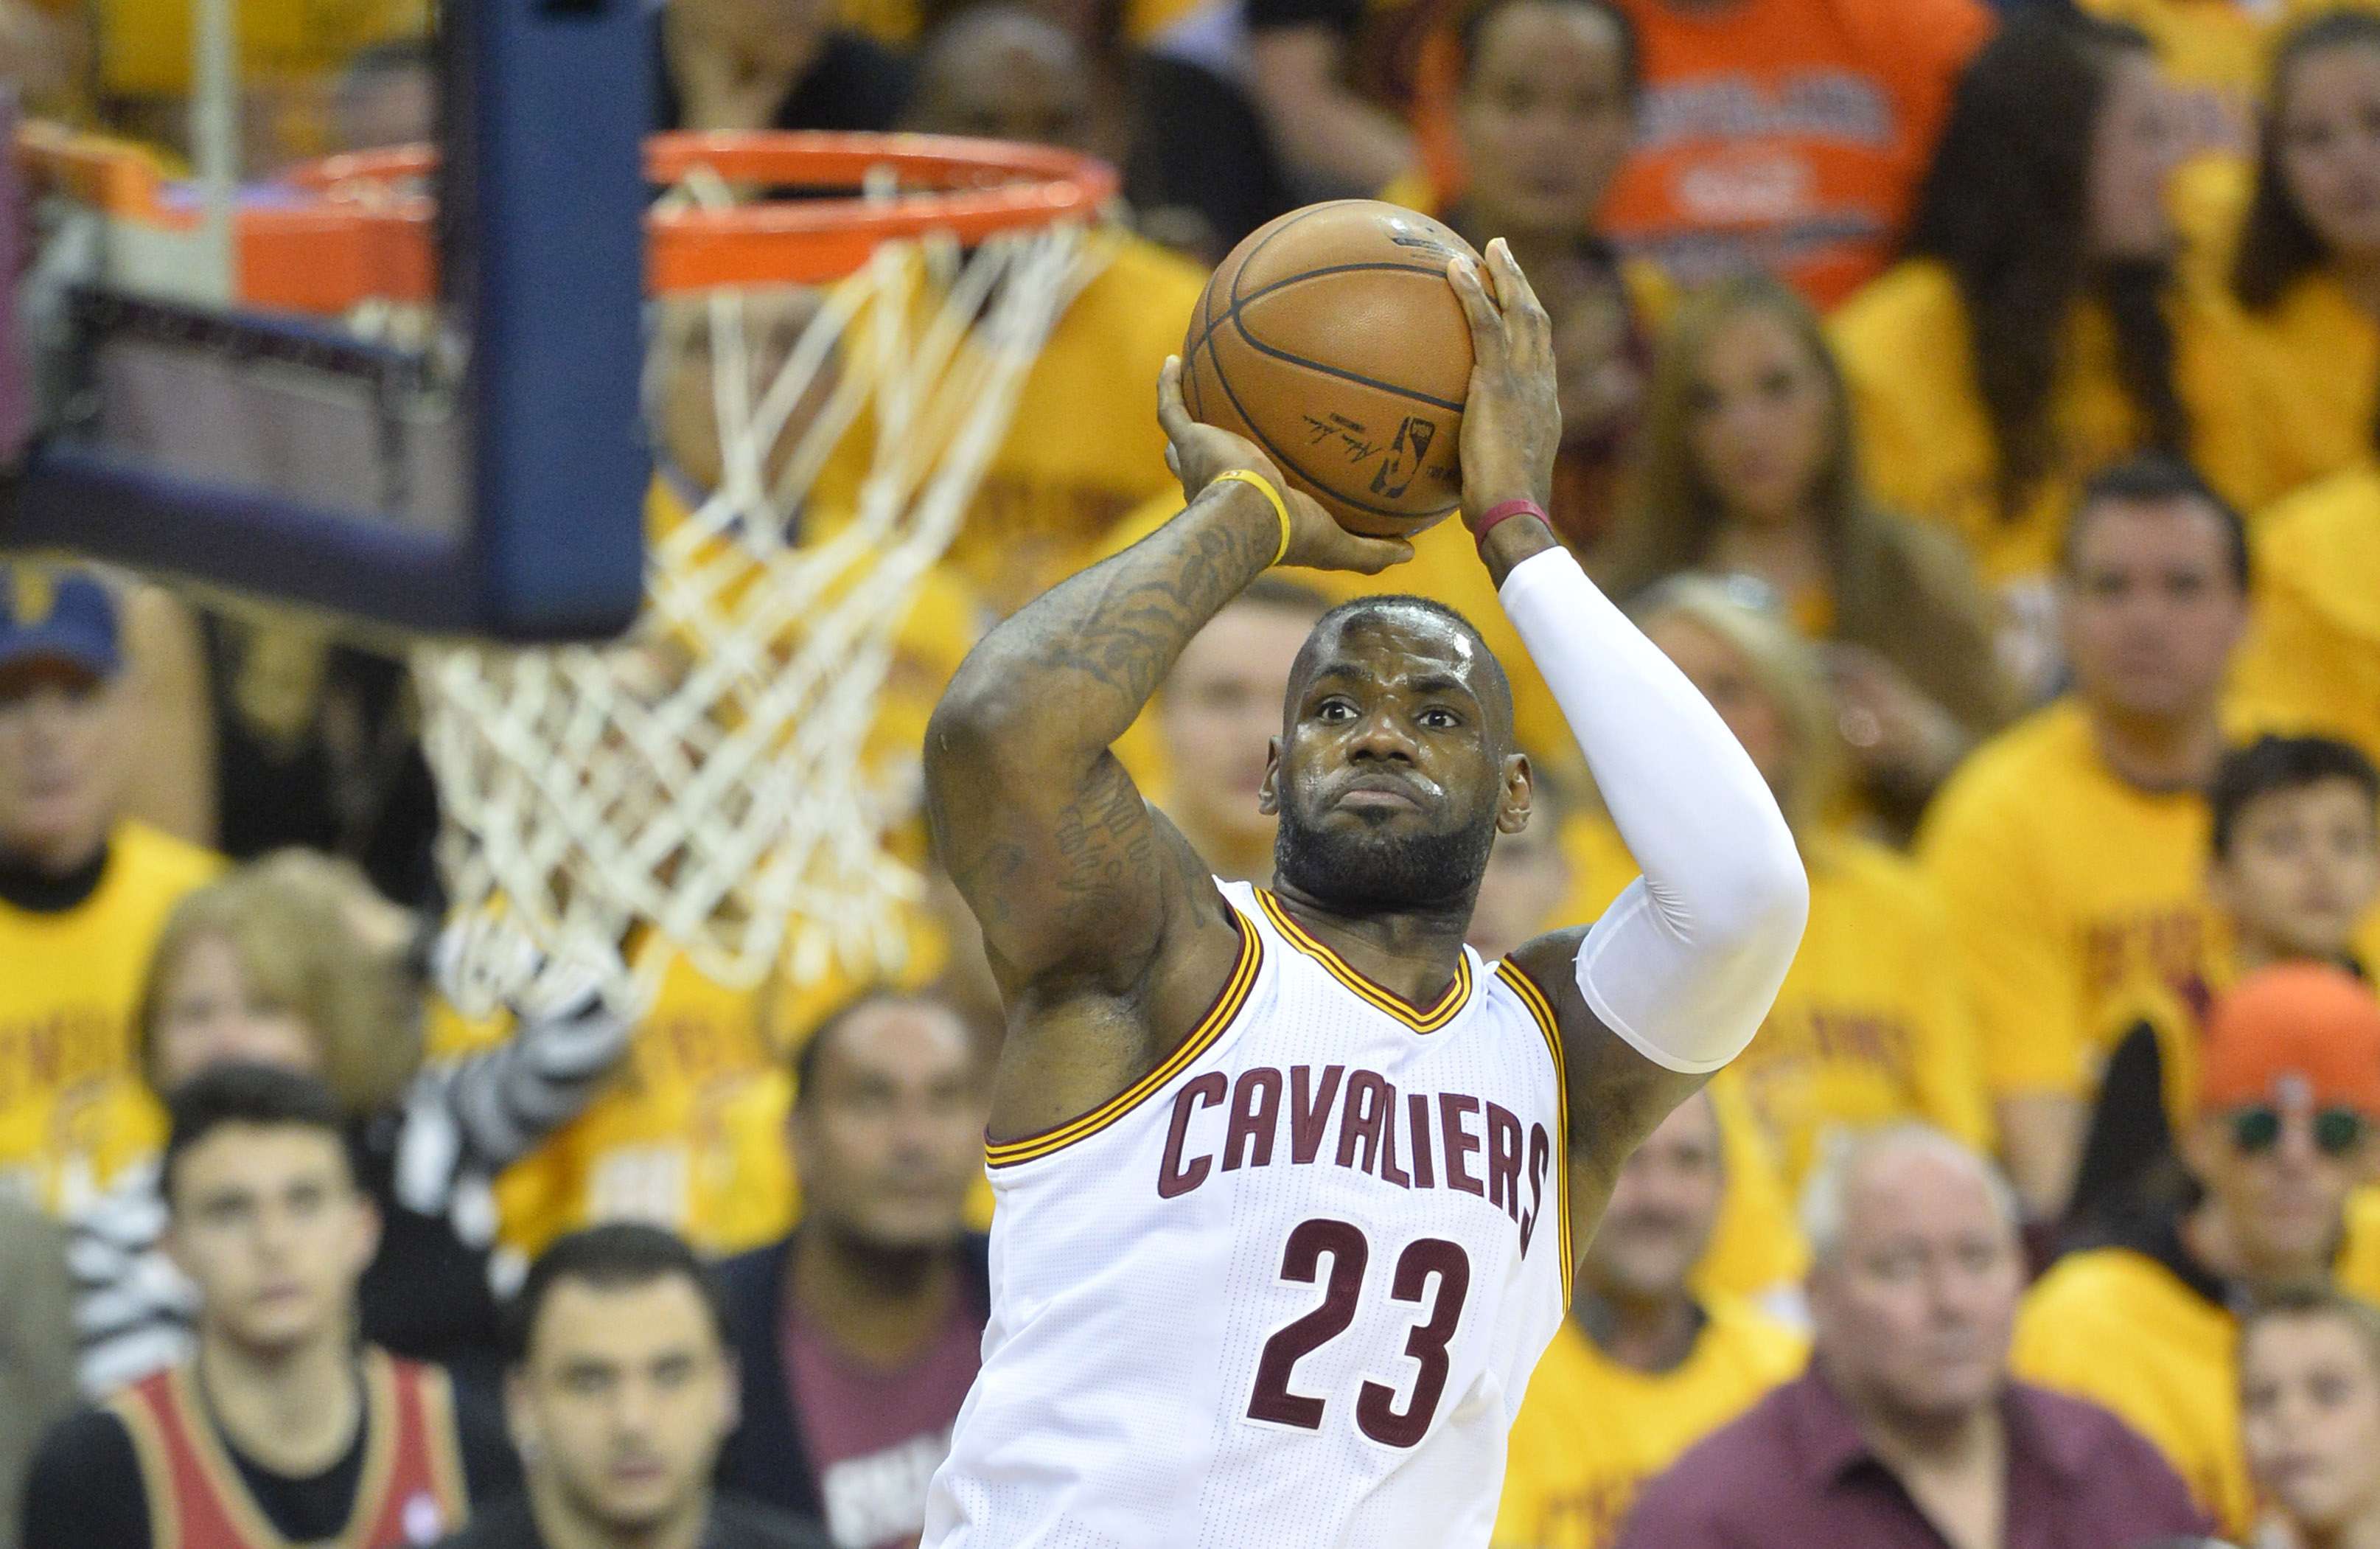 LeBron shoots in the first quarter. Photo: USA TODAY Sports